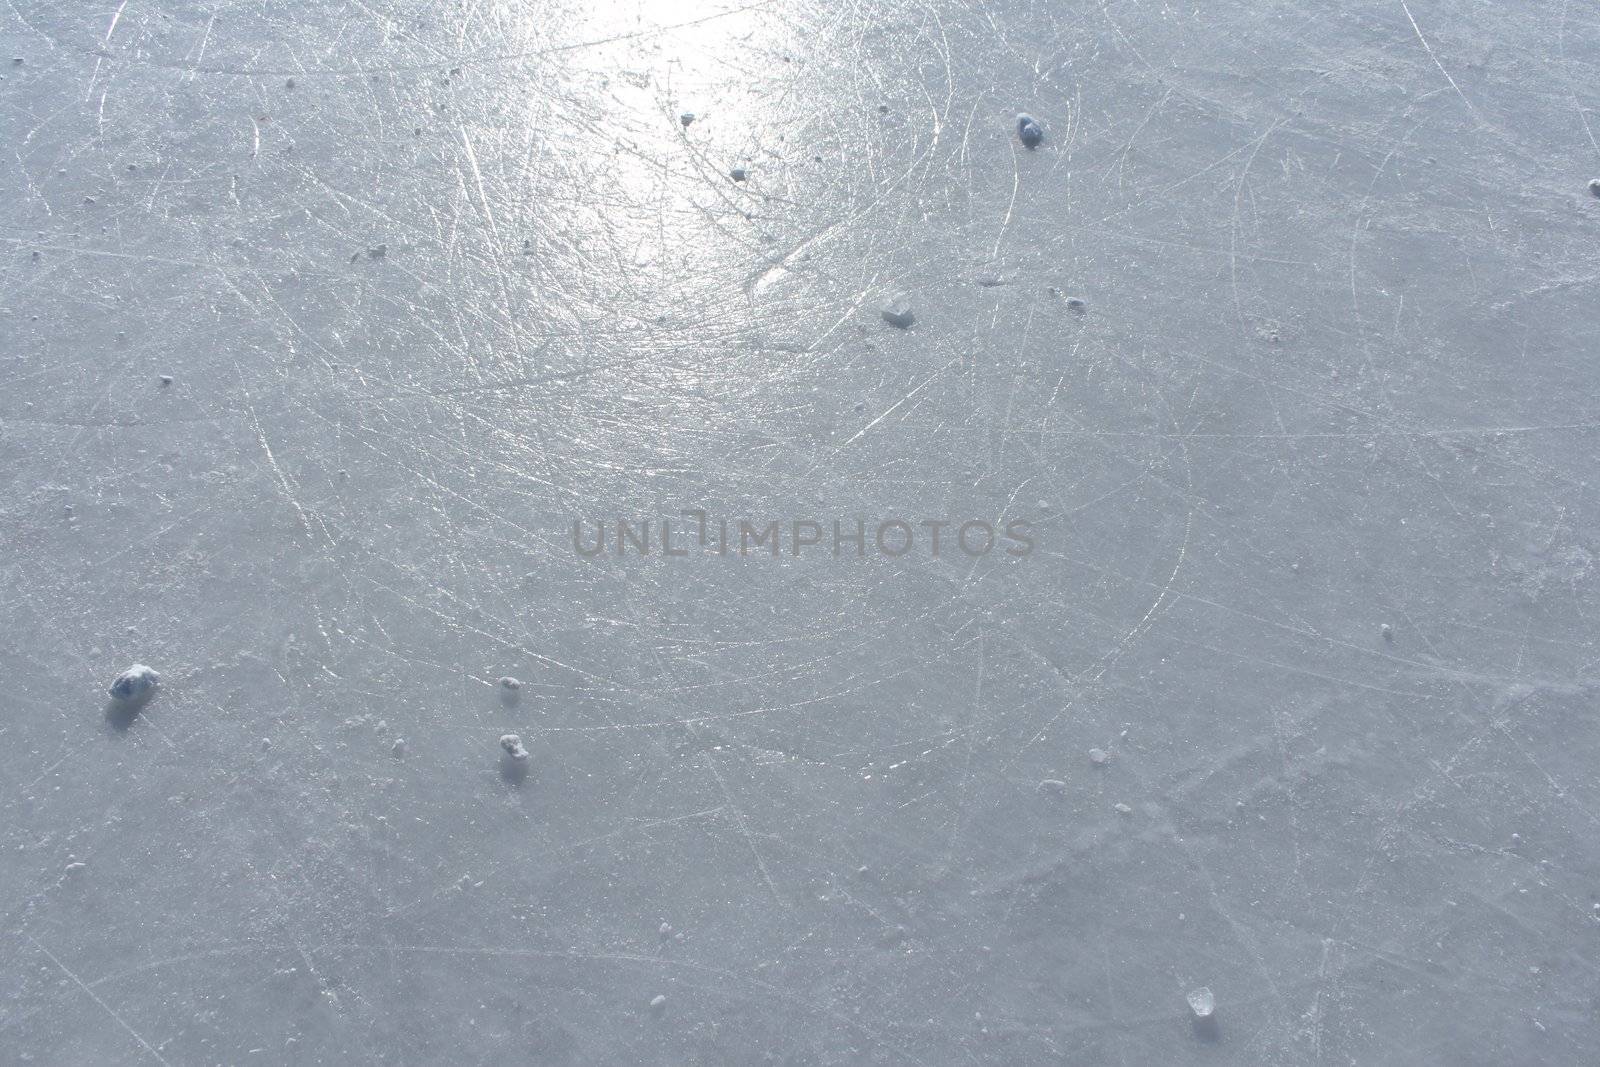 Sun reflecting in the surface of an ice rink by anikasalsera